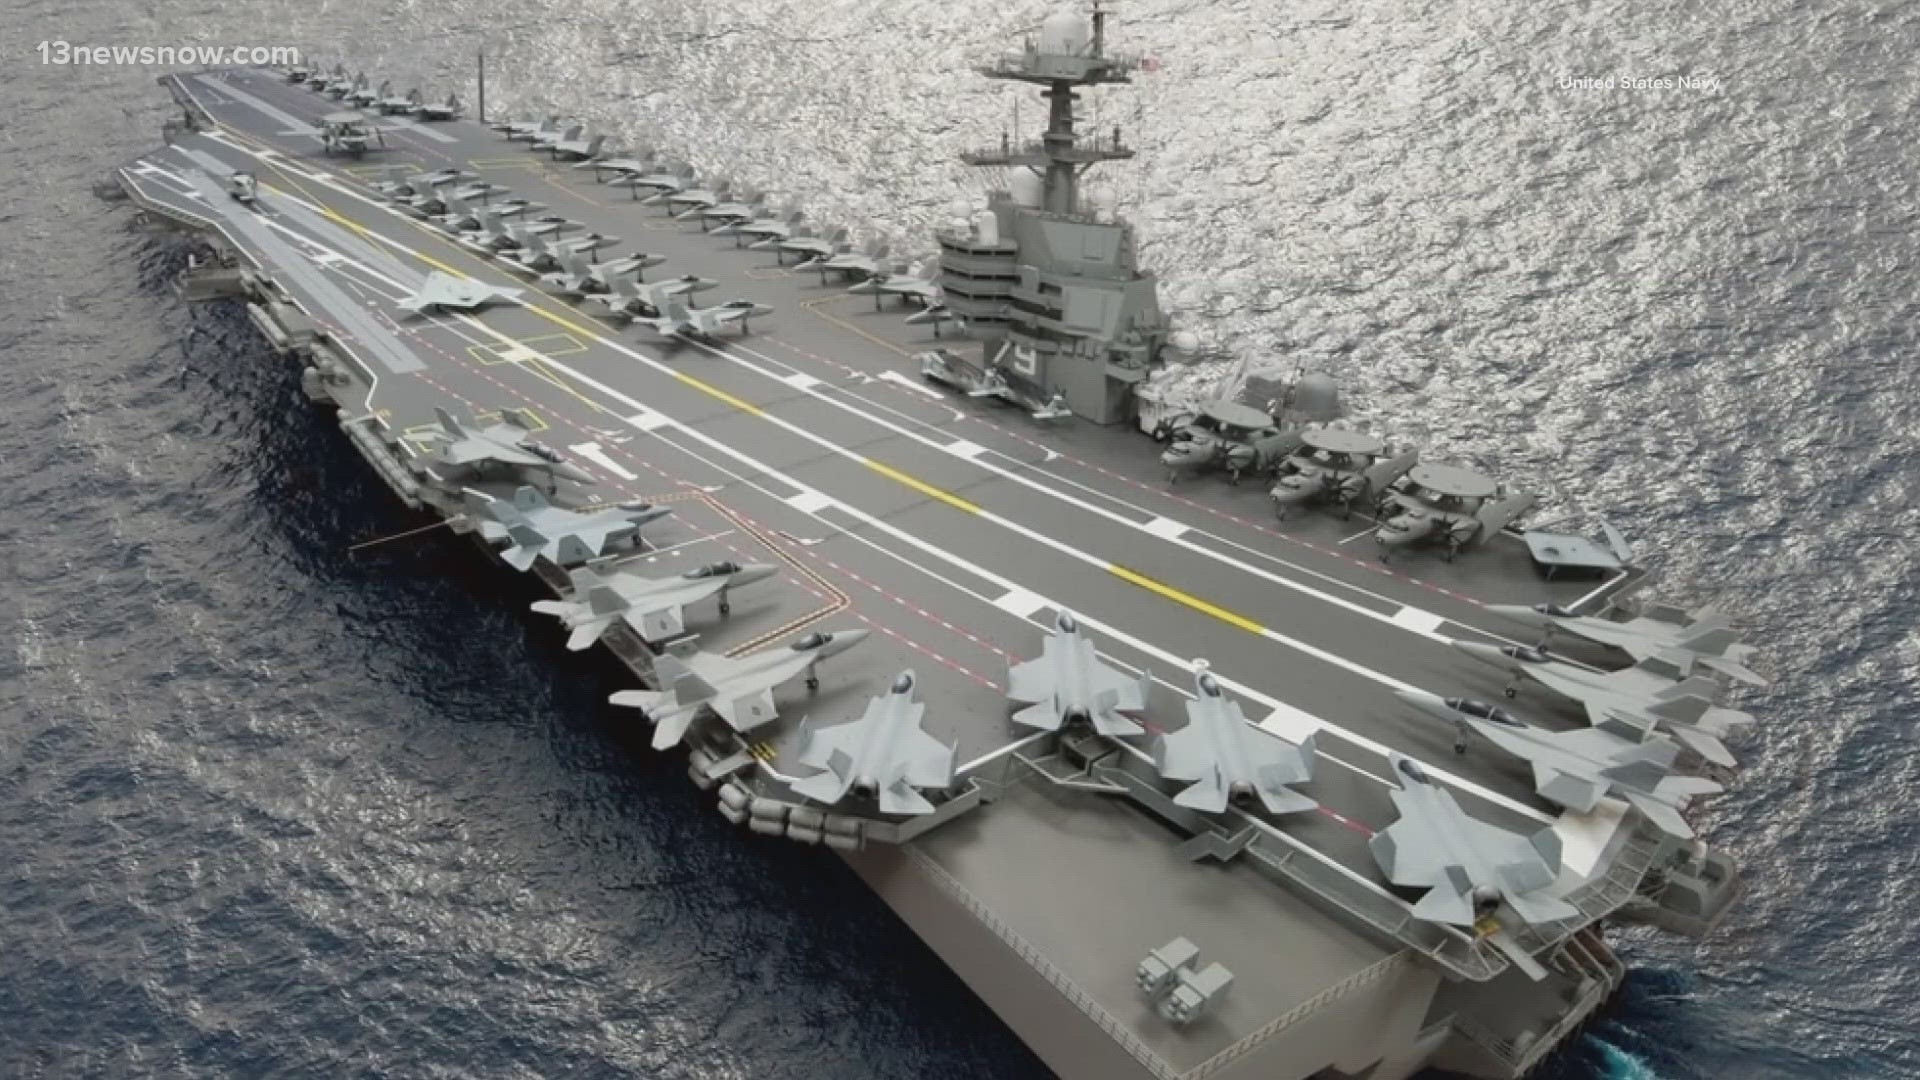 All 4 members of the Hampton Roads Congressional delegation are pushing to protect the Navy's Ford-class aircraft carriers, constructed at Newport News Shipbuilding.